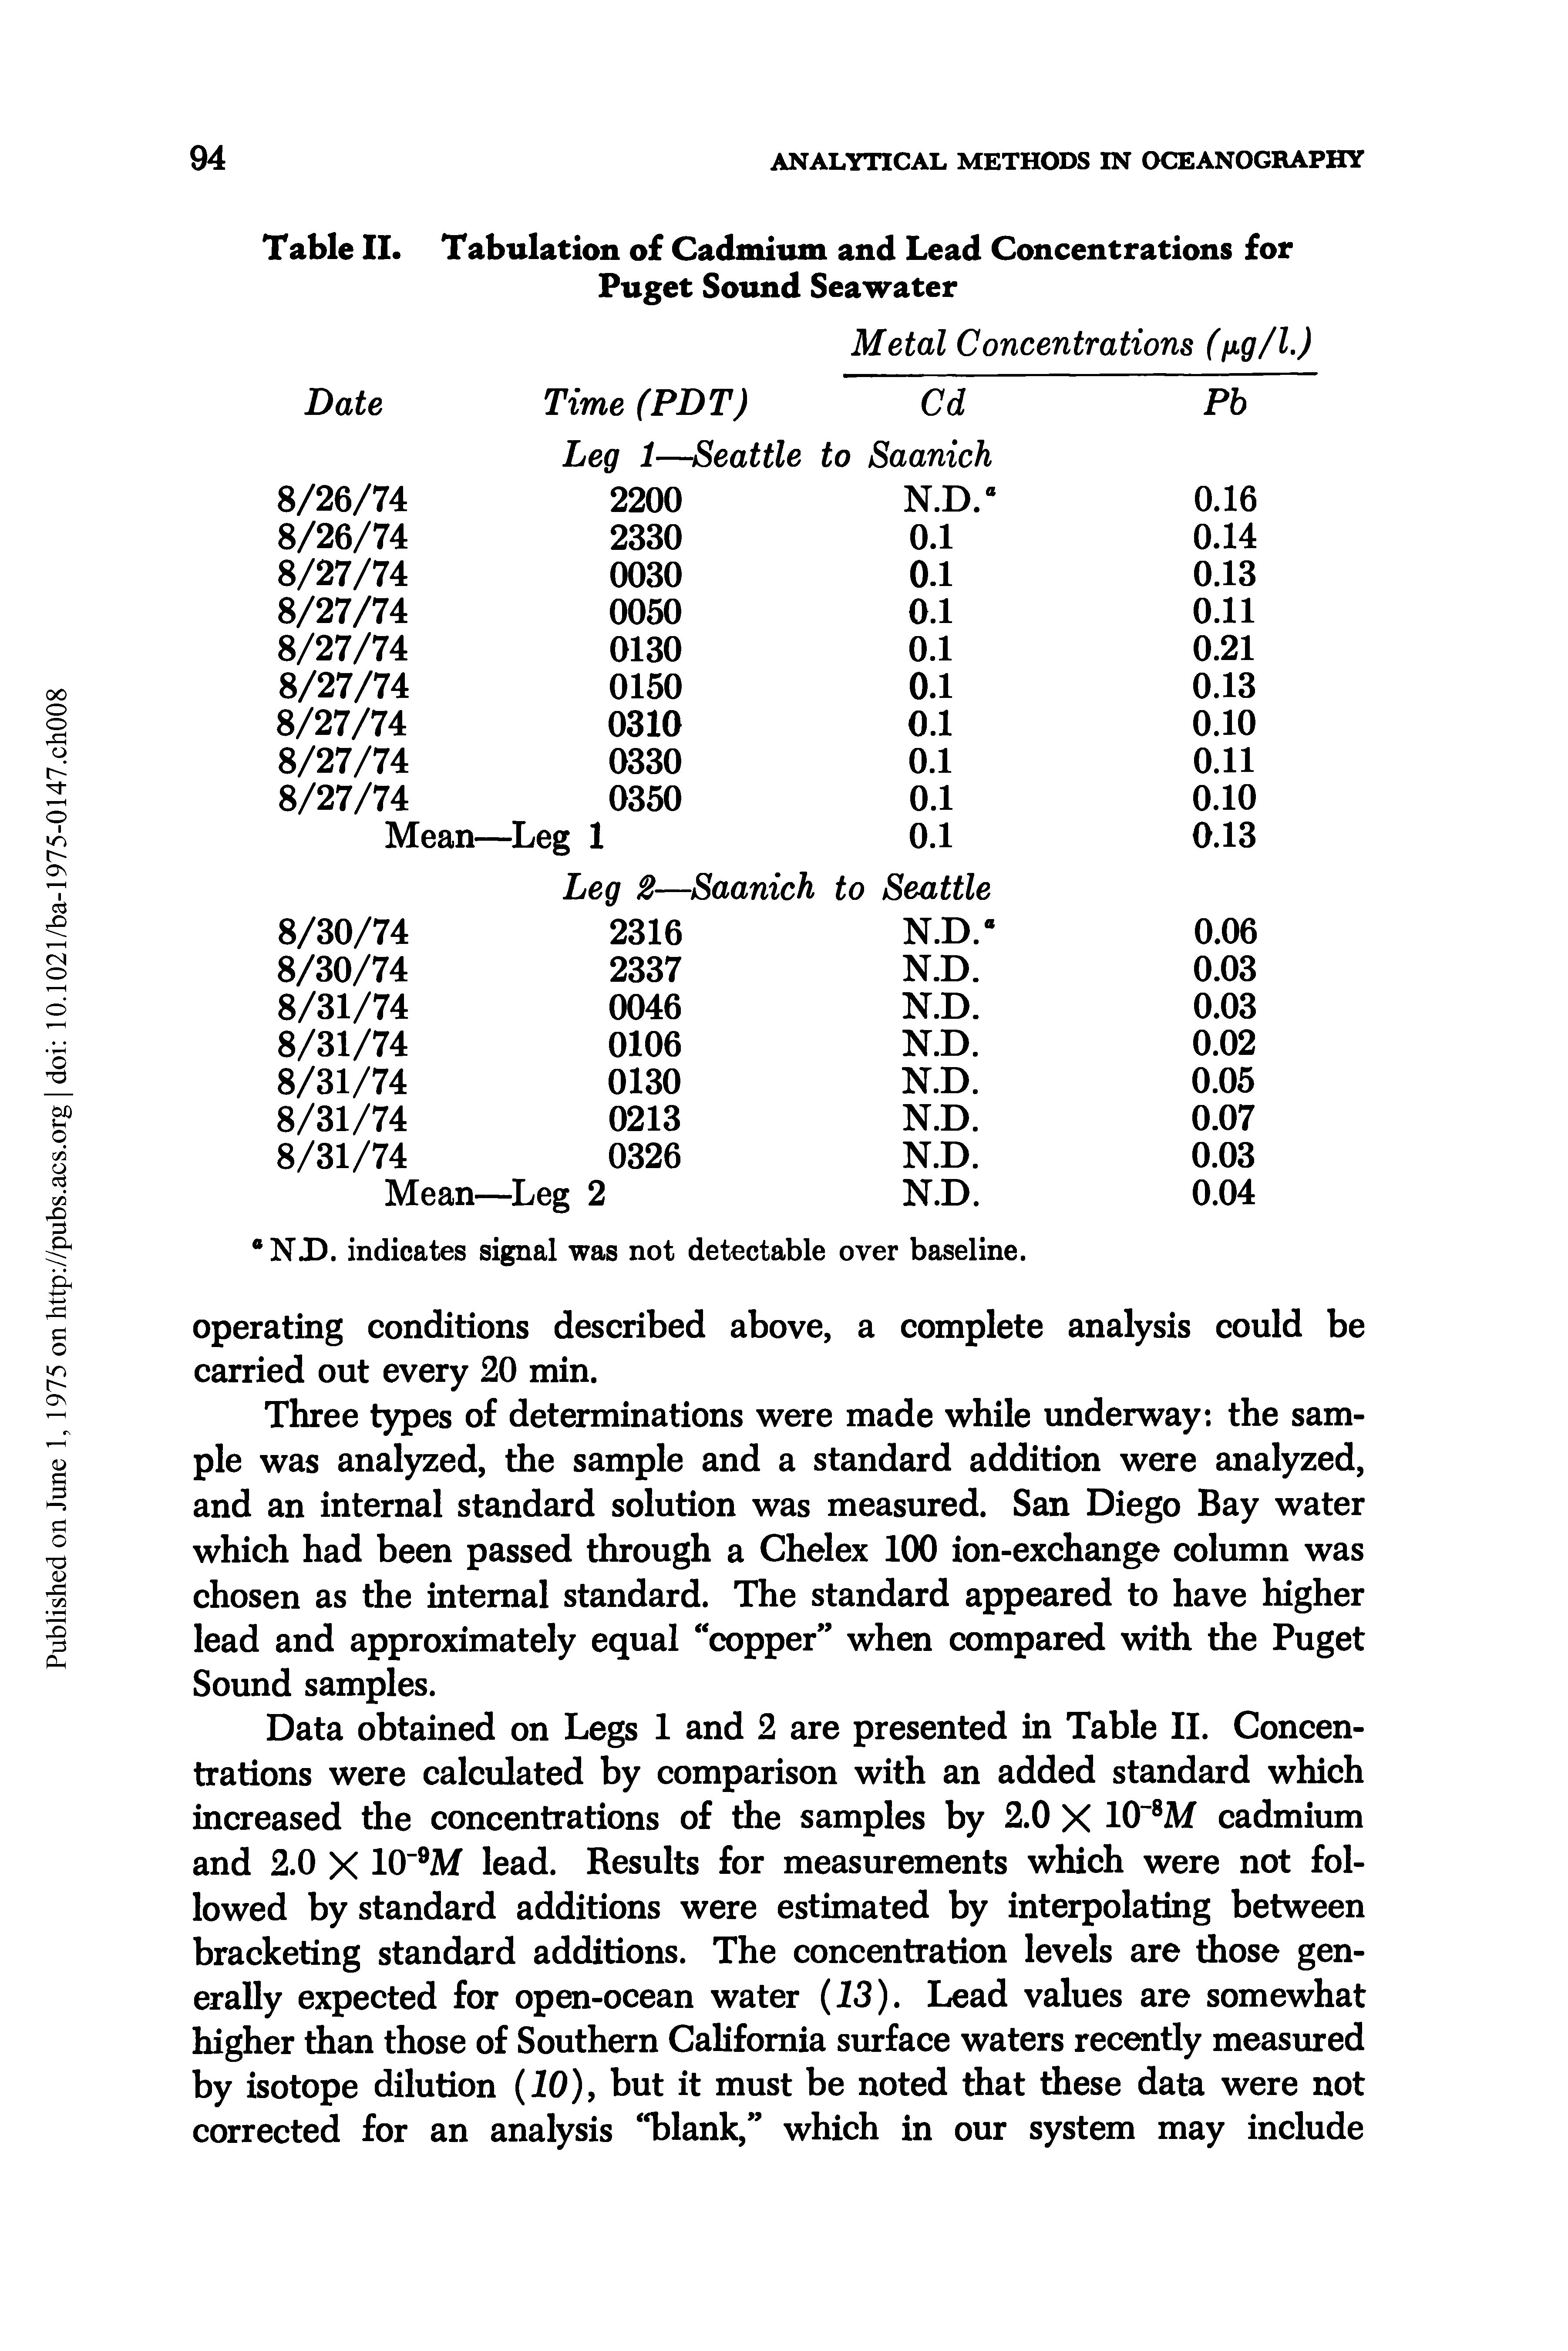 Table II. Tabulation of Cadmium and Lead Concentrations for Puget Sound Seawater...